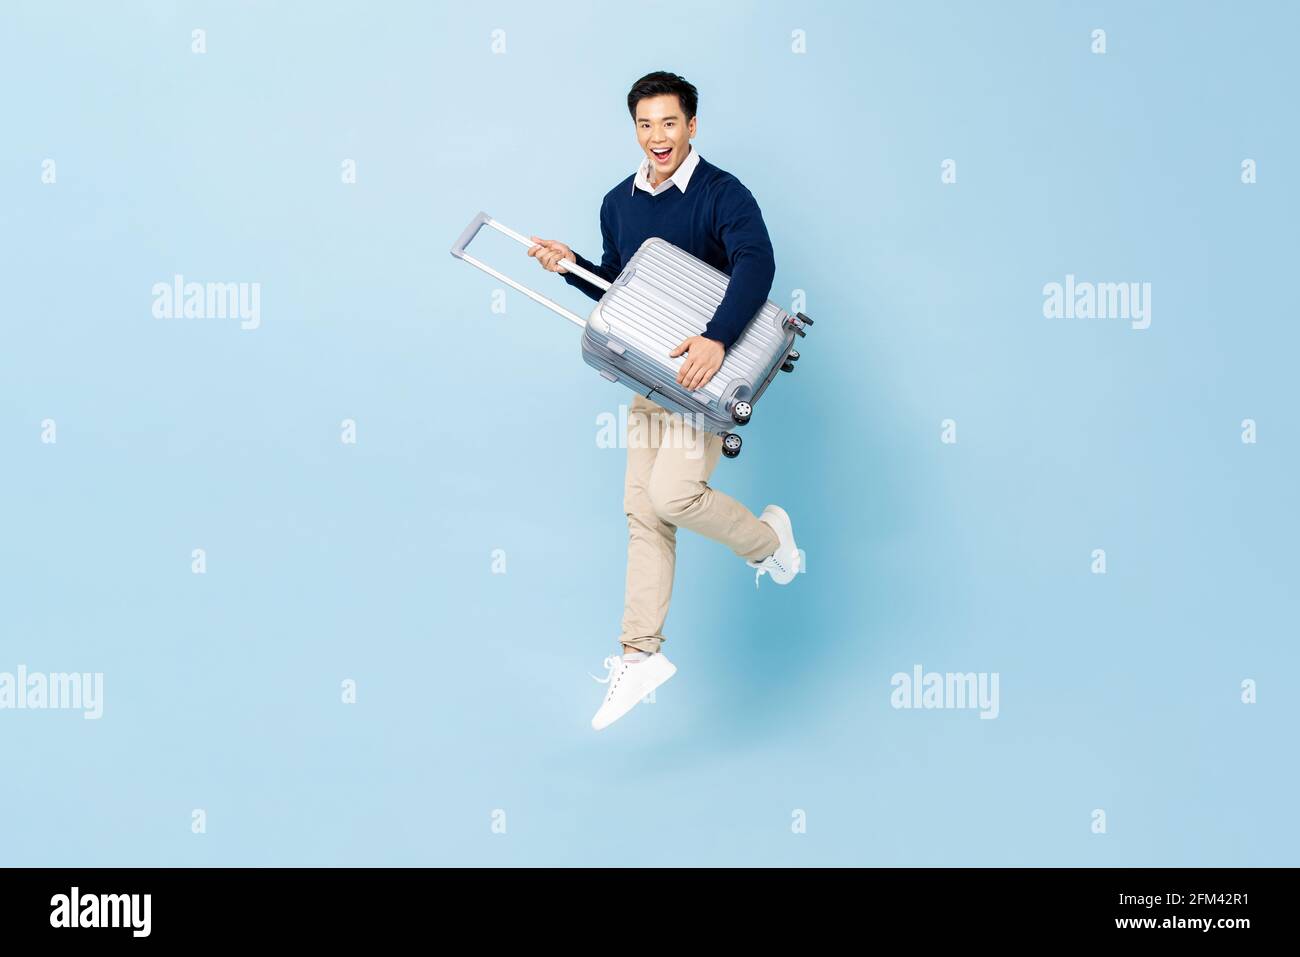 Jumping portrait of young fit healthy smiling handsome Asian tourist man with baggage ready to fly isolated on light blue studio background Stock Photo